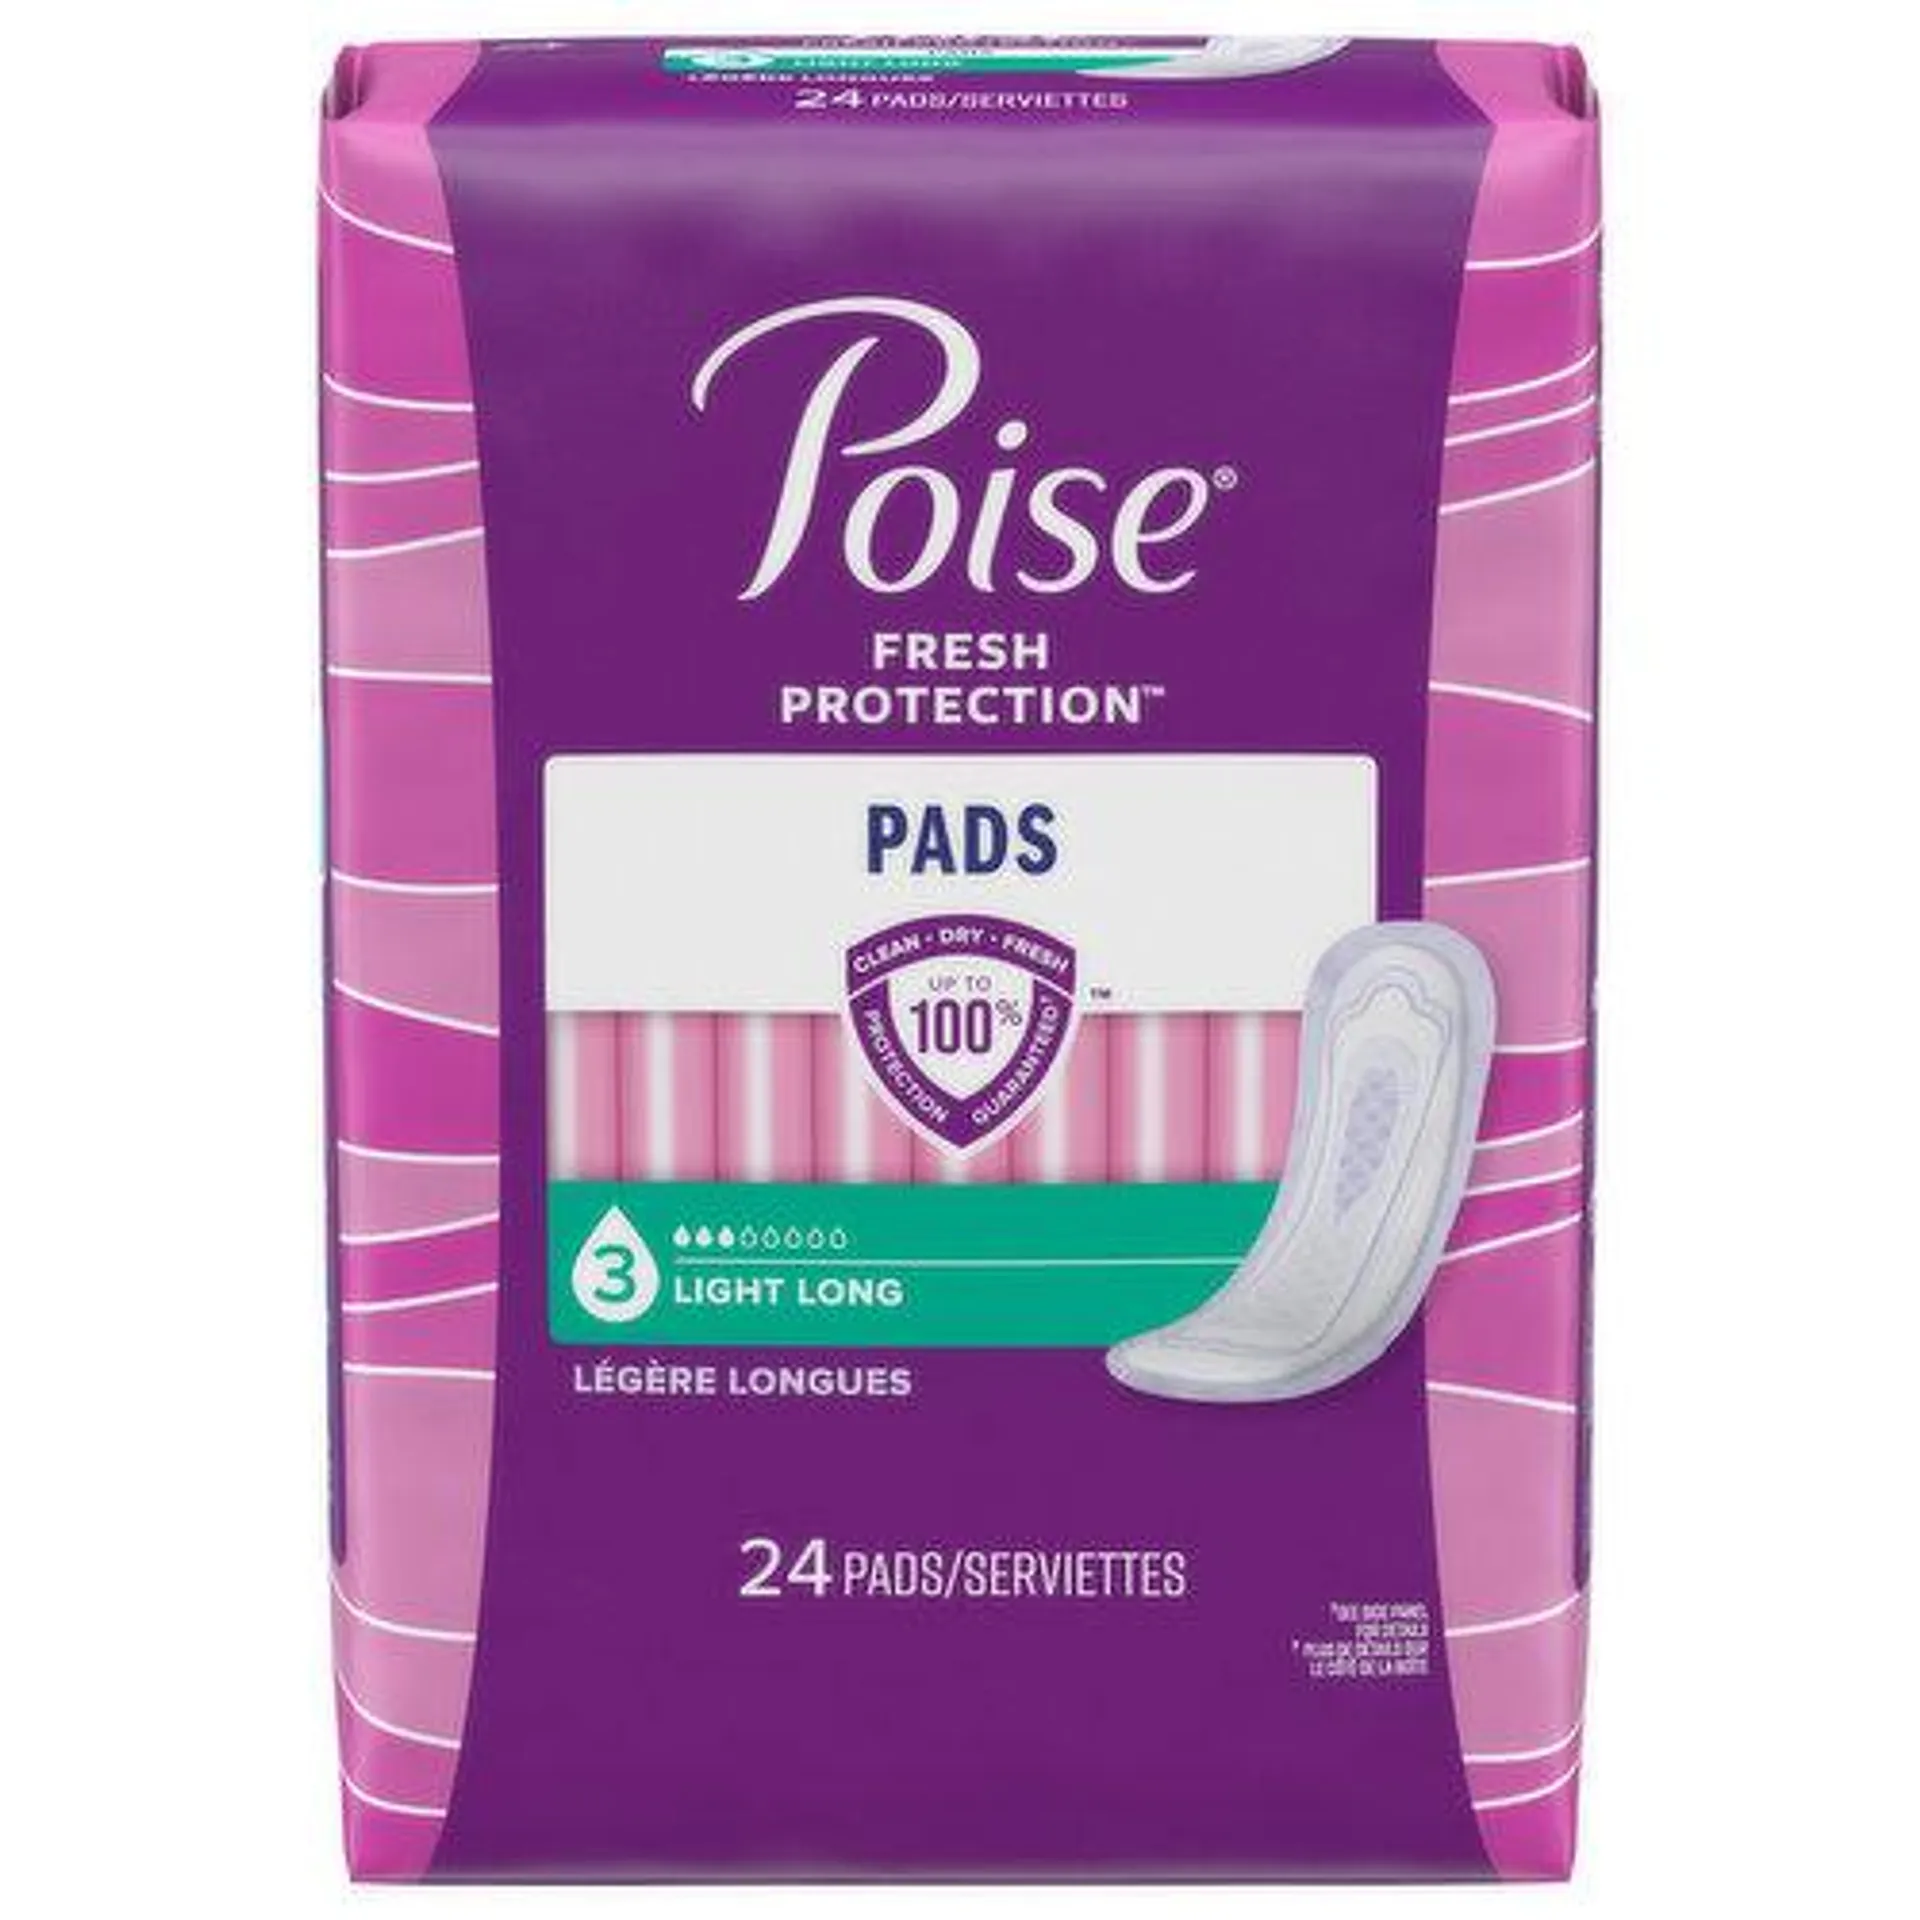 Poise Fresh Protection Pads, Light, Long, 24 Each